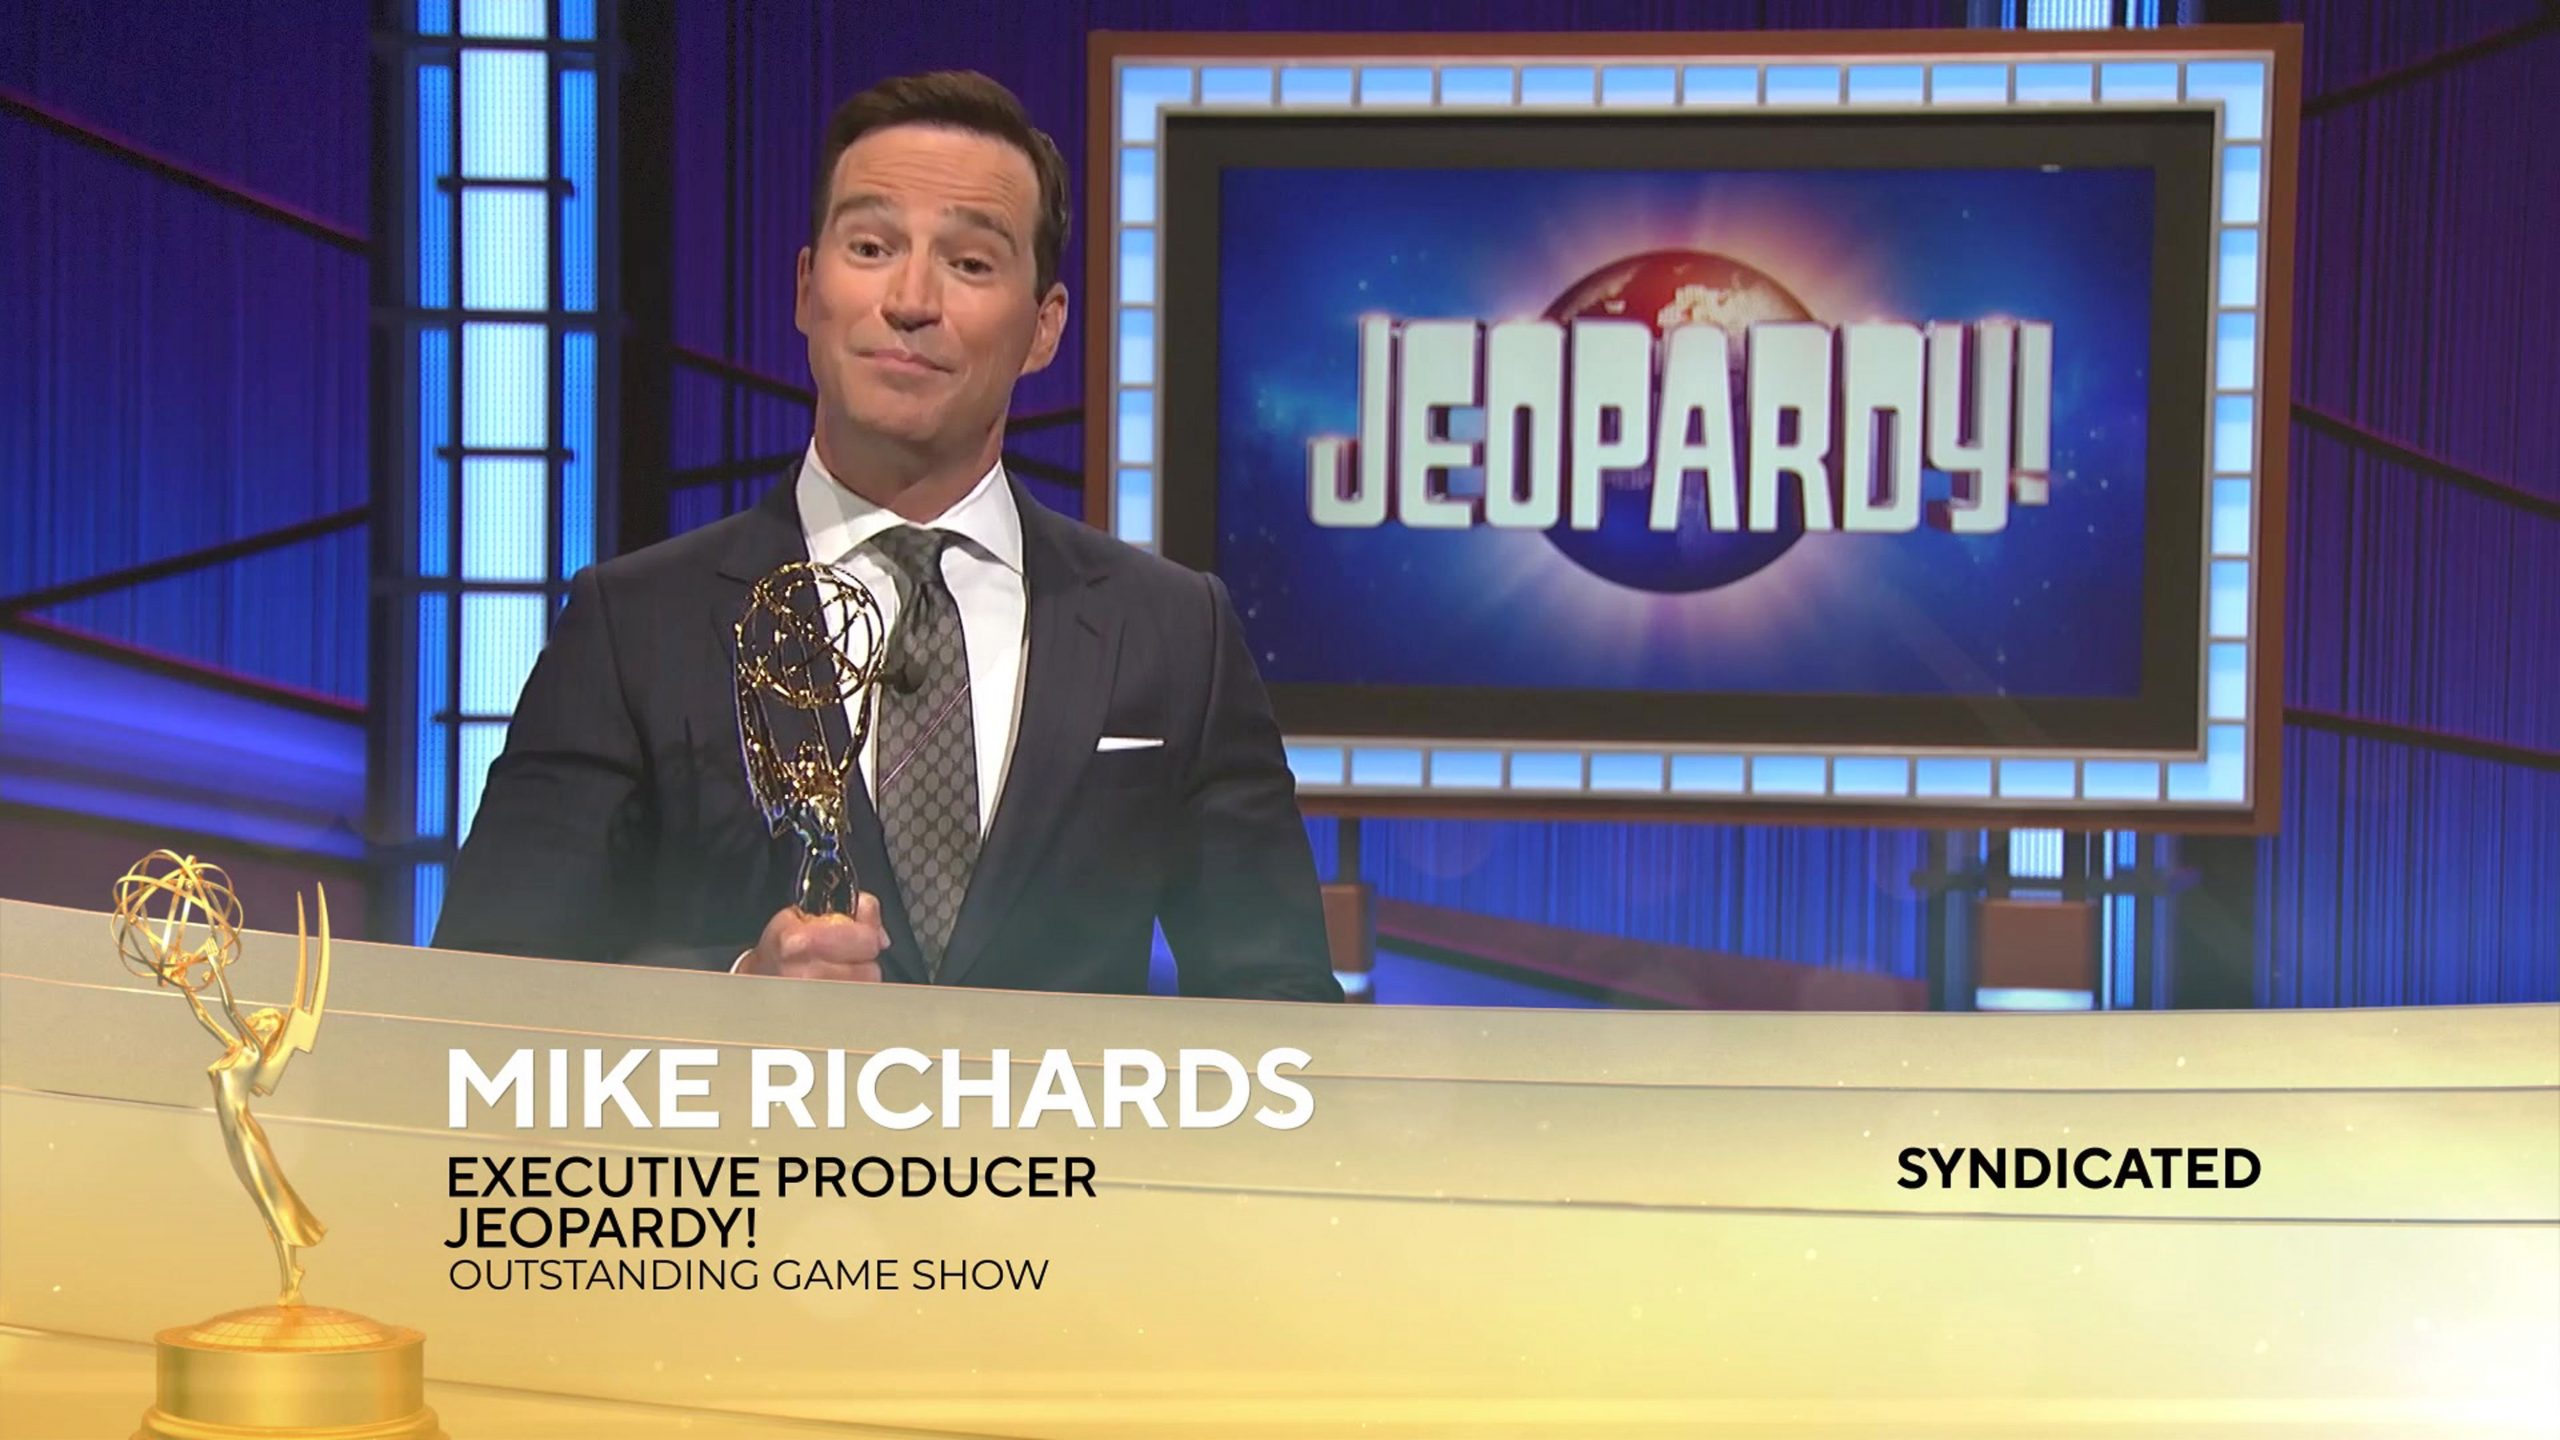 'Jeopardy!' executive producer Mike Richards accepts a 2021 Emmy for the game show.